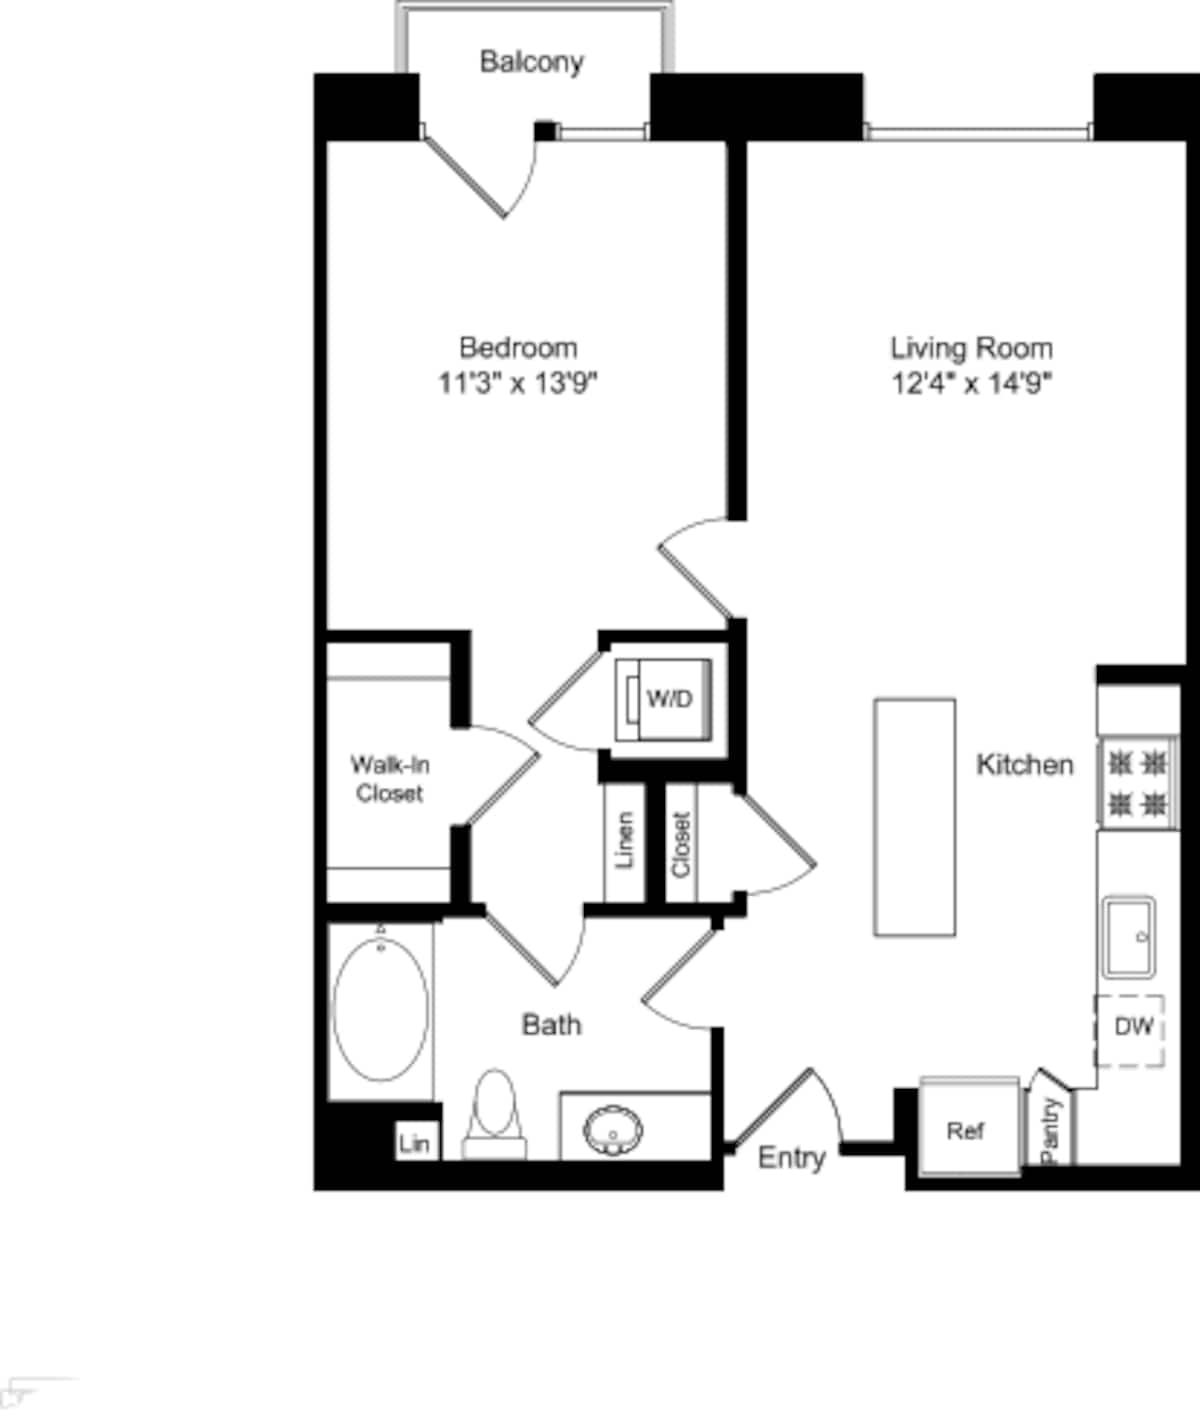 Floorplan diagram for One Bed A1 with Master Balcony, showing 1 bedroom